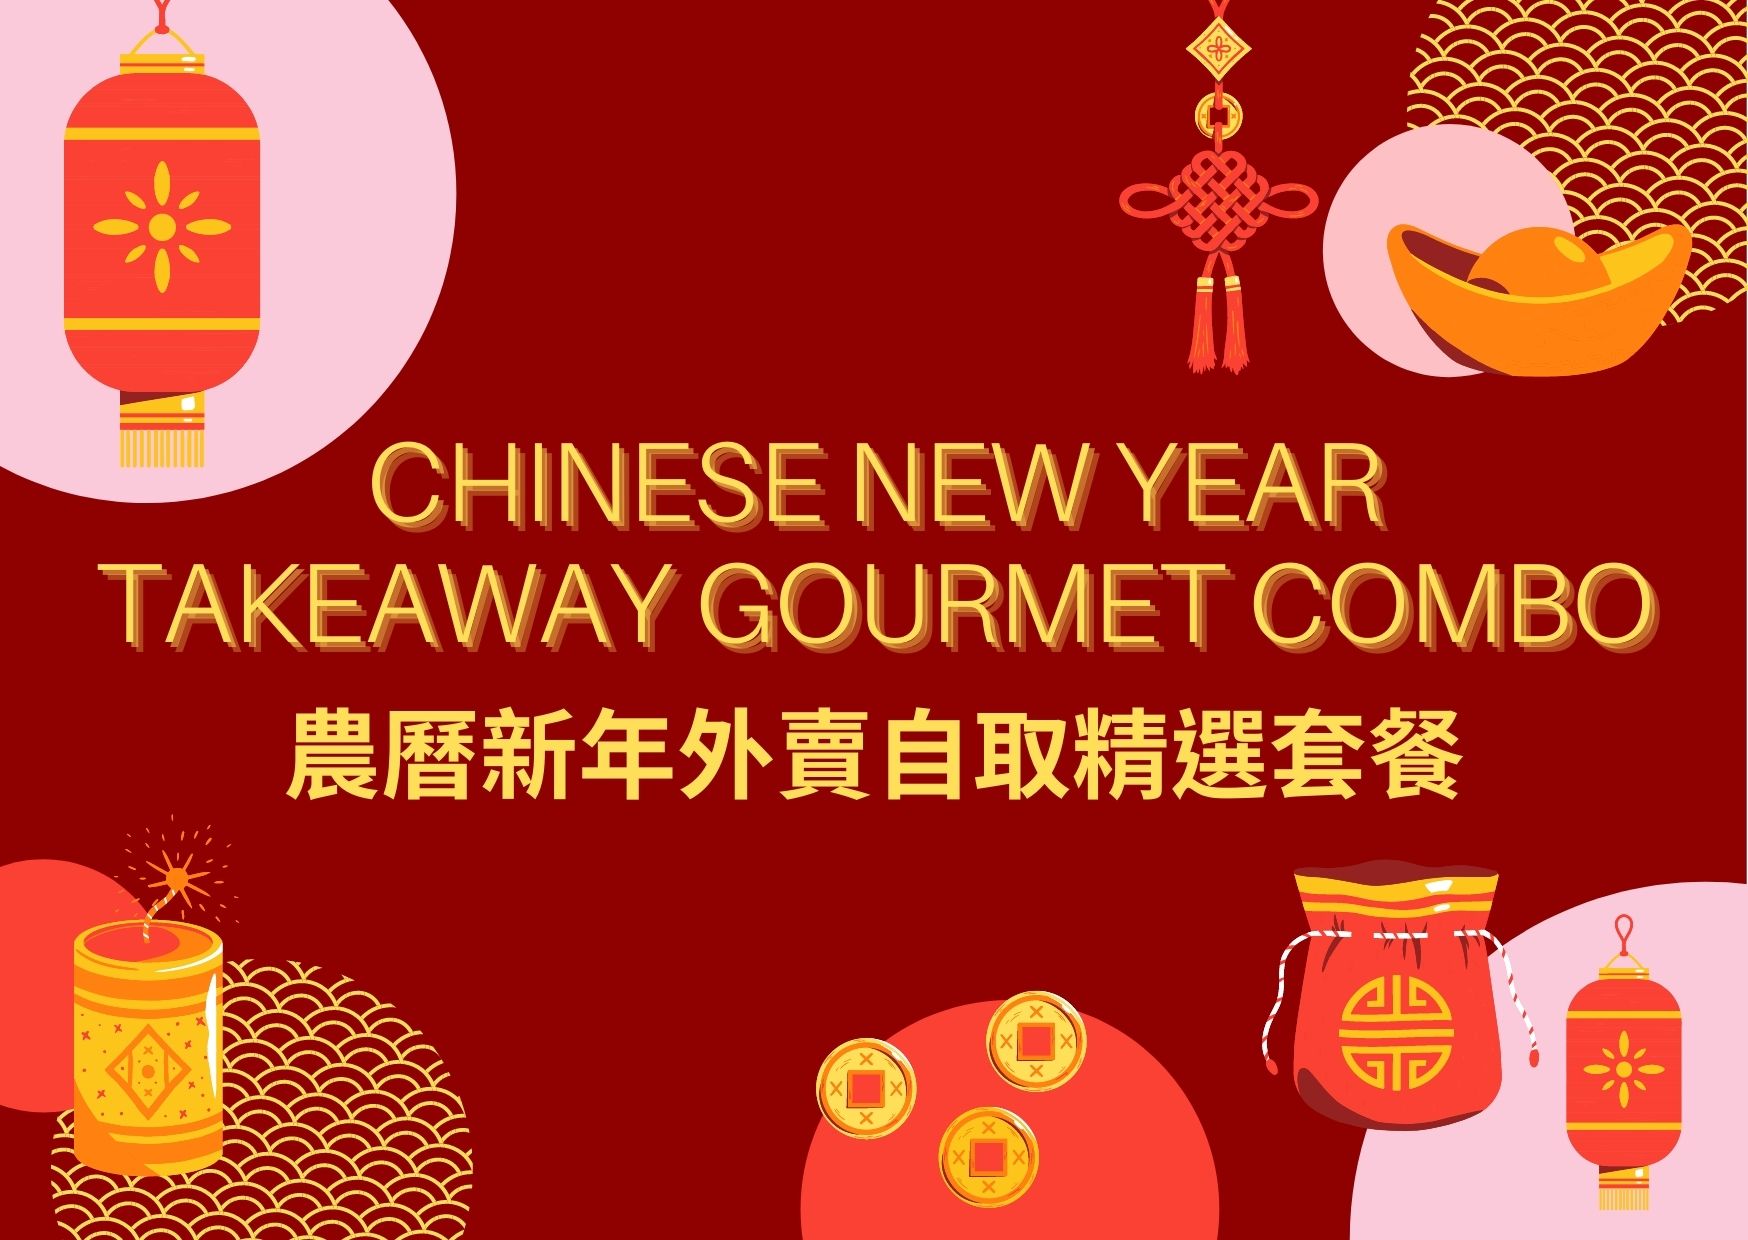 Chinese New Year Takeaway Gourmet Combo